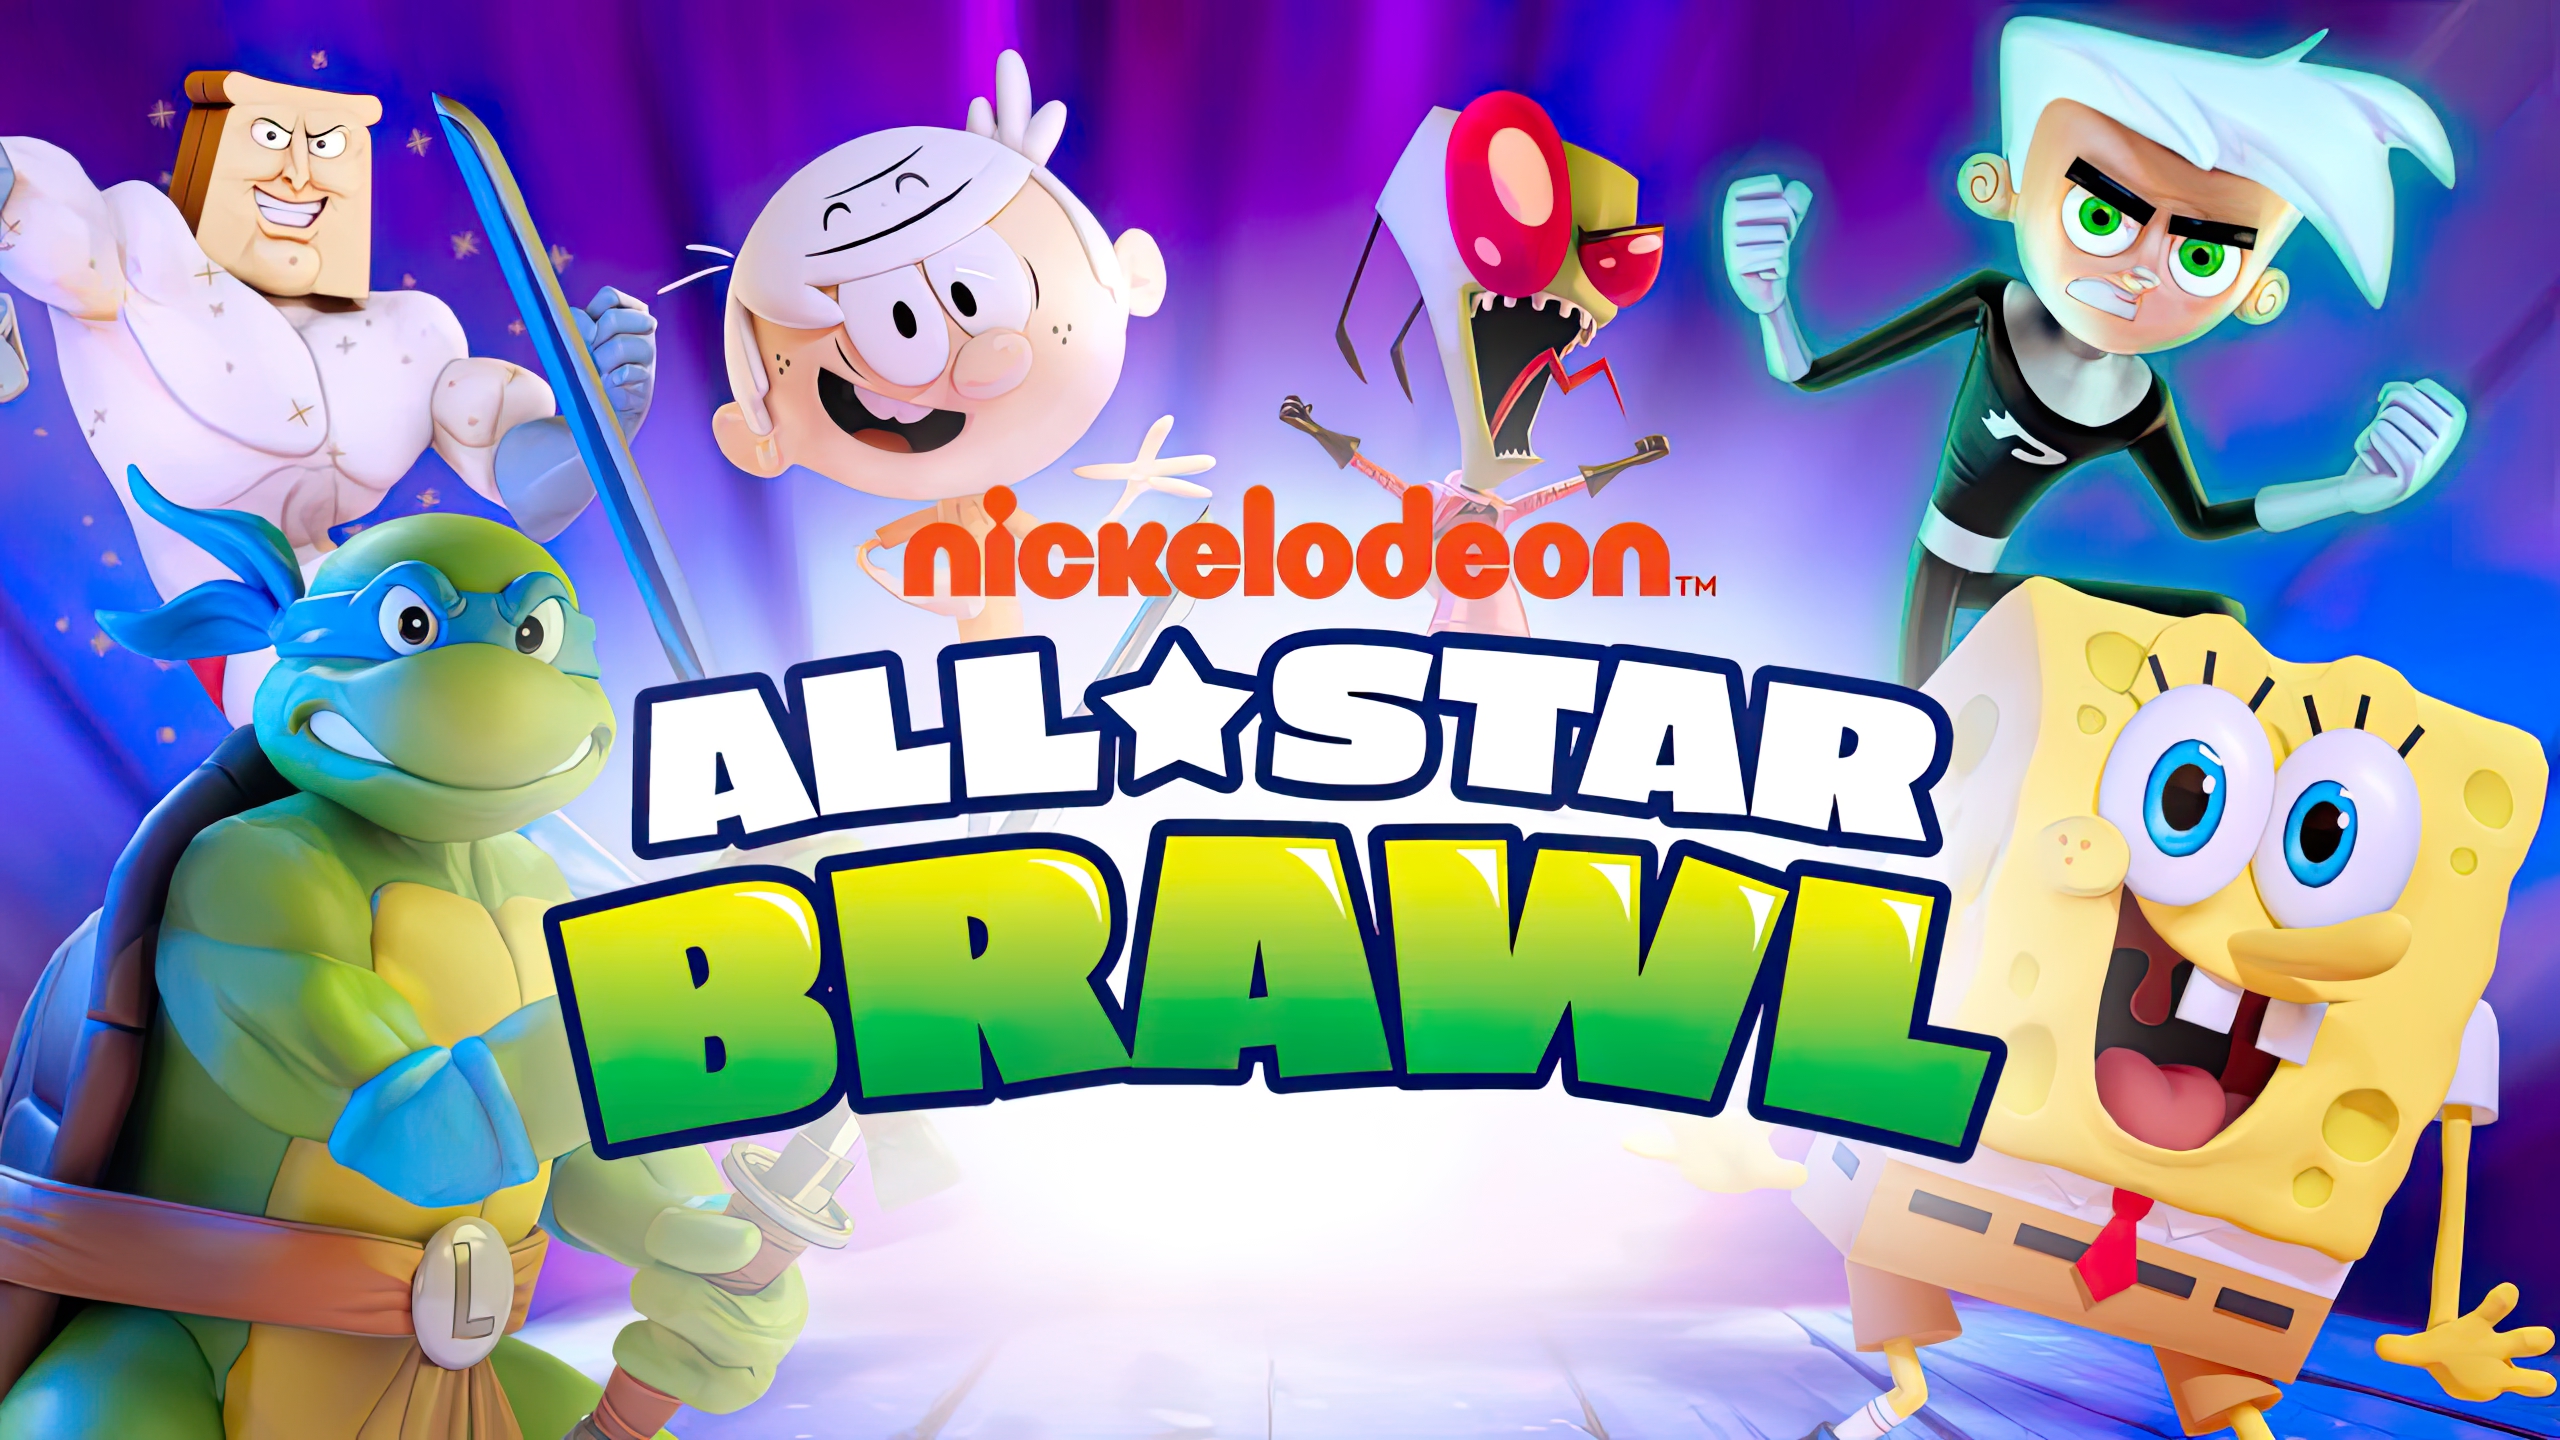 HD wallpaper of Nickelodeon All-Star Brawl featuring popular characters for desktop background.